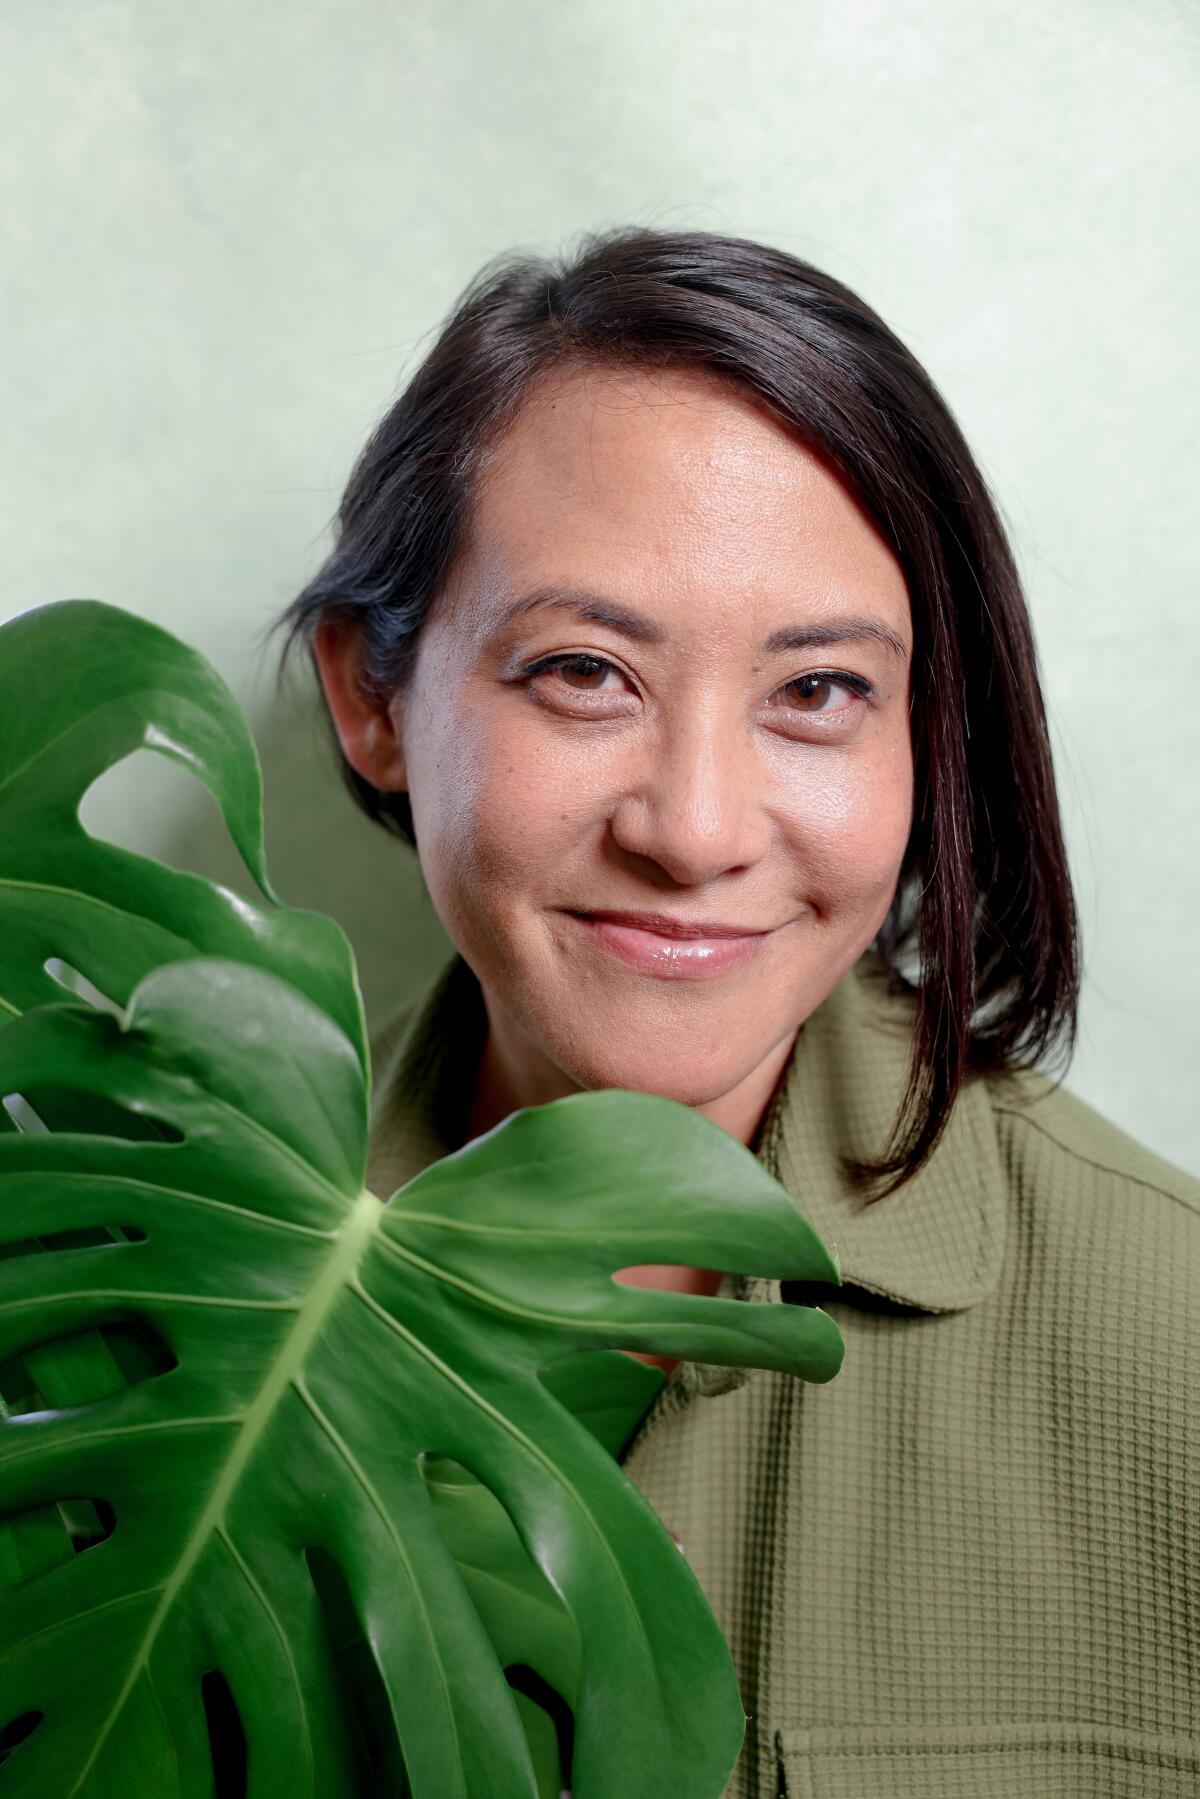 A woman with short, dark hair smiles at the camera while holding a plant.